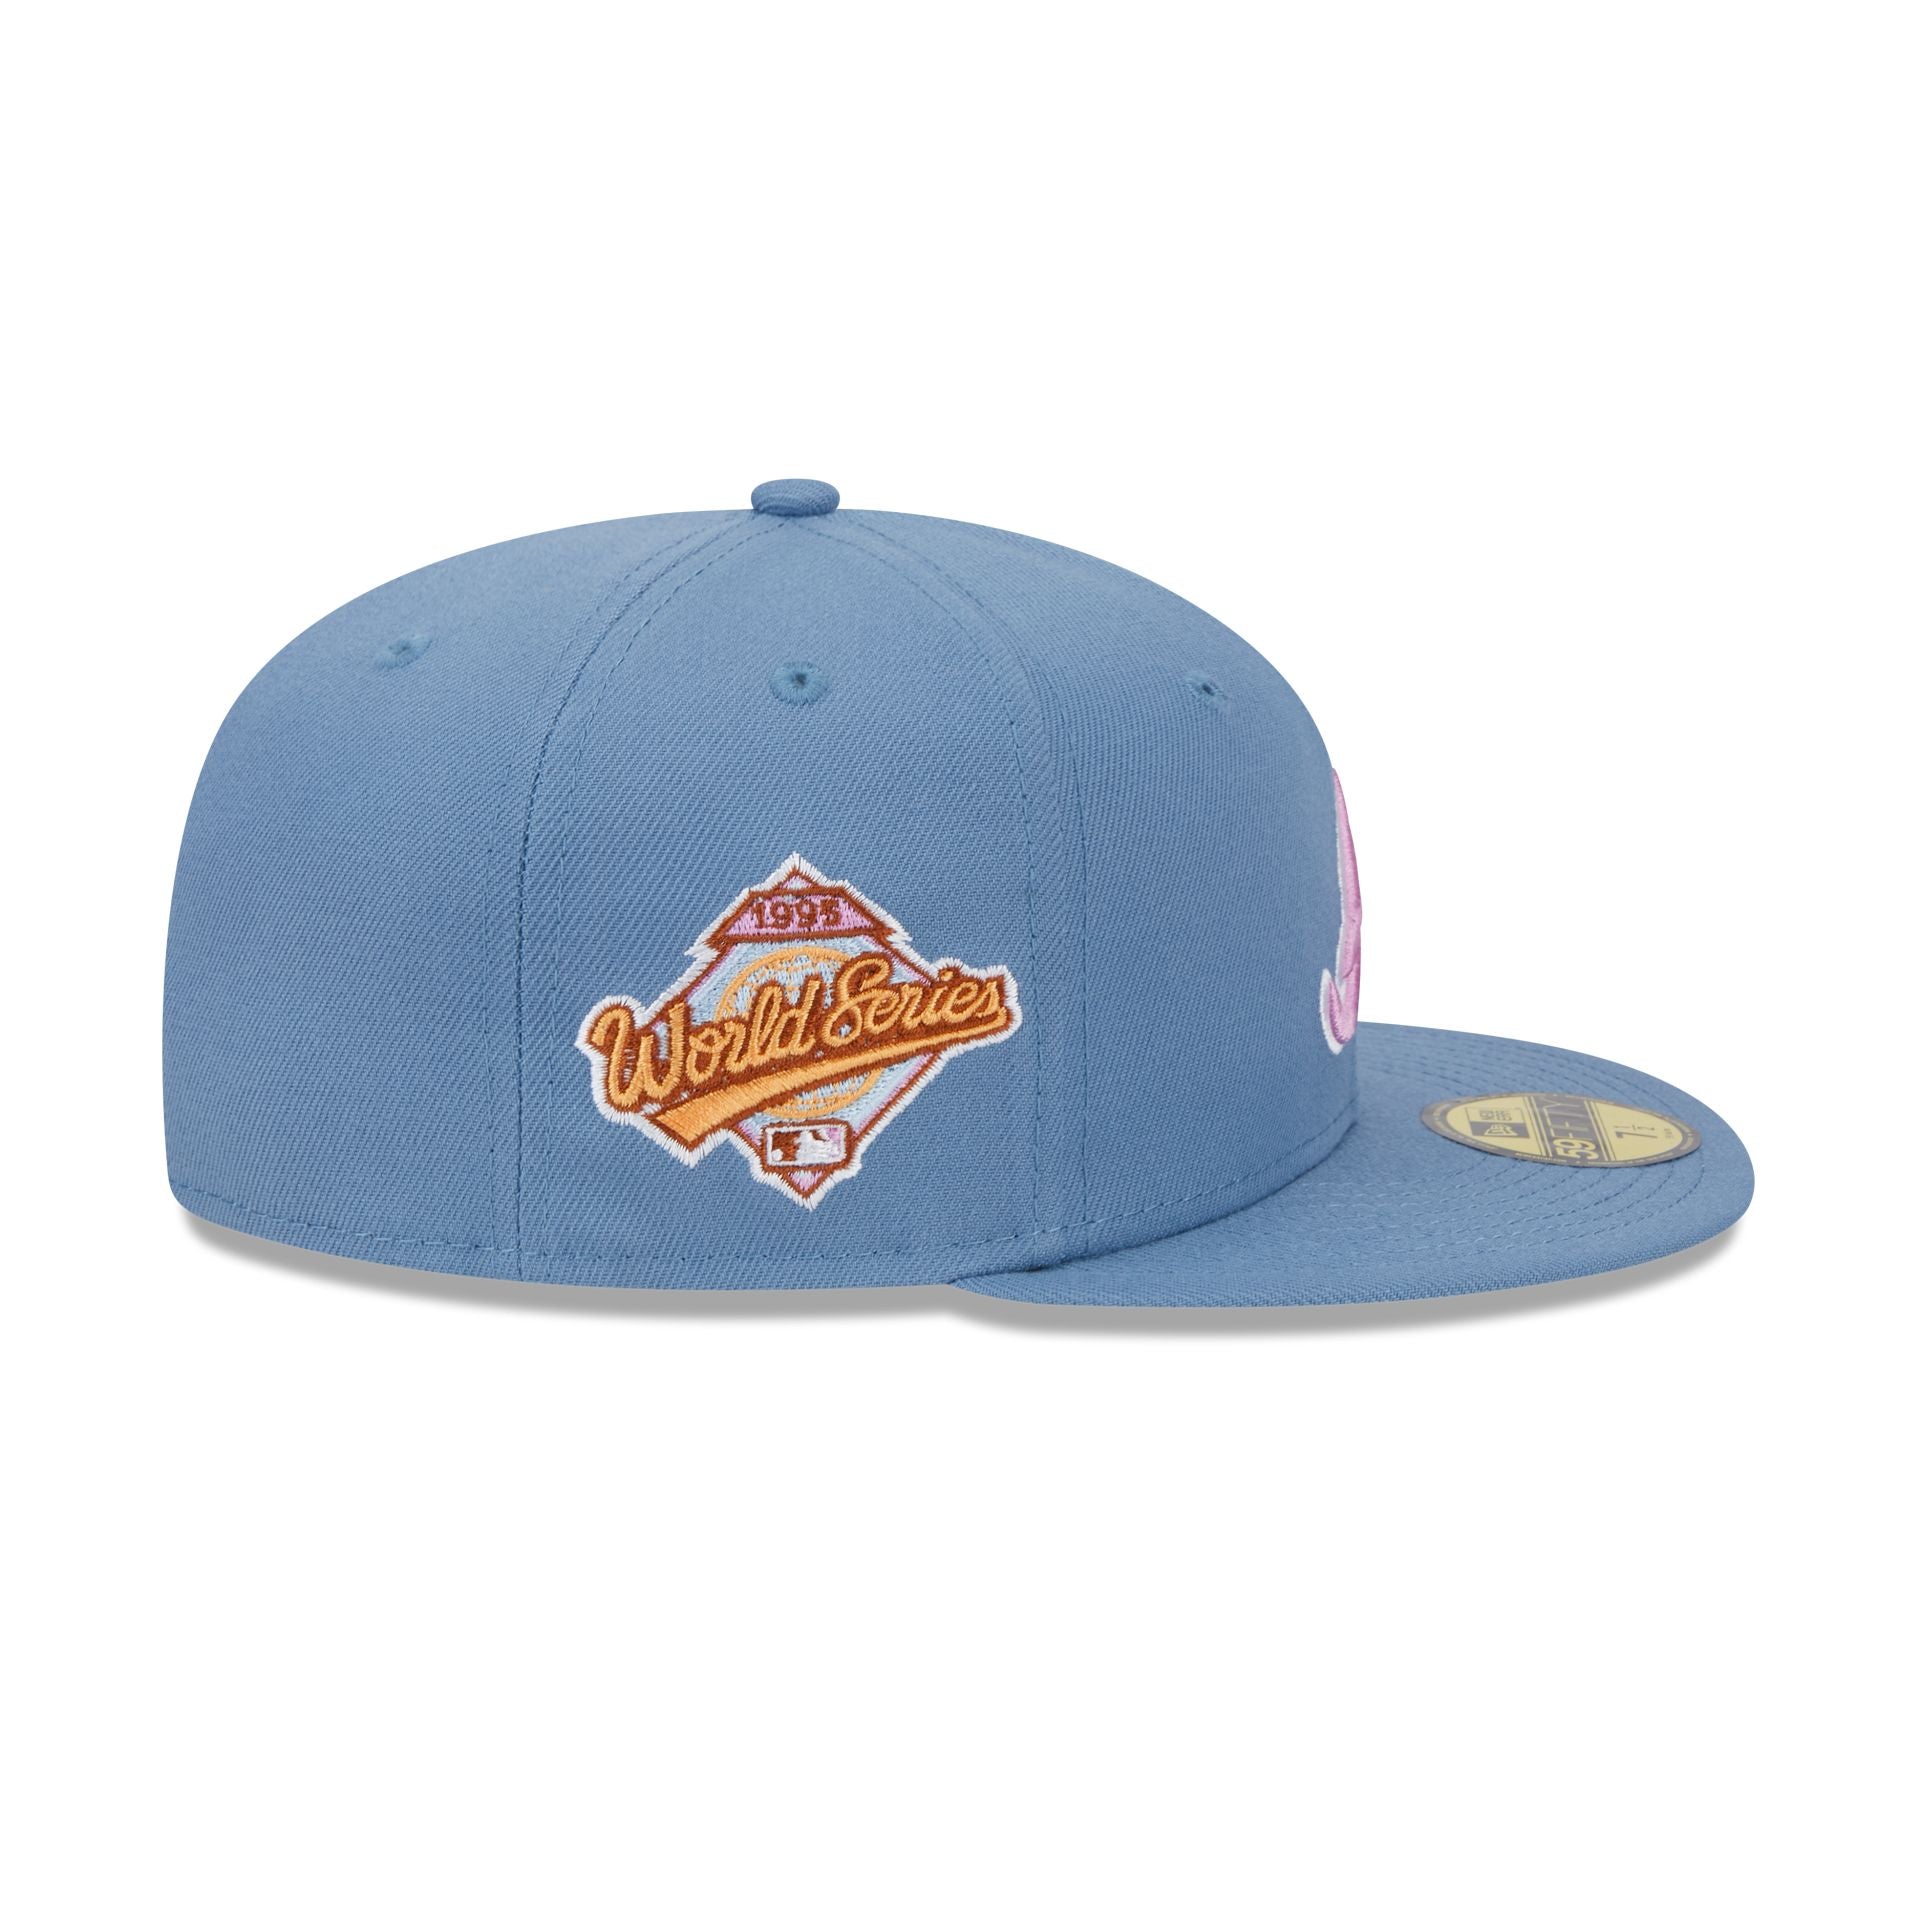 Atlanta Braves 59FIFTY Color Pack Light Blue Fitted - New Era cap